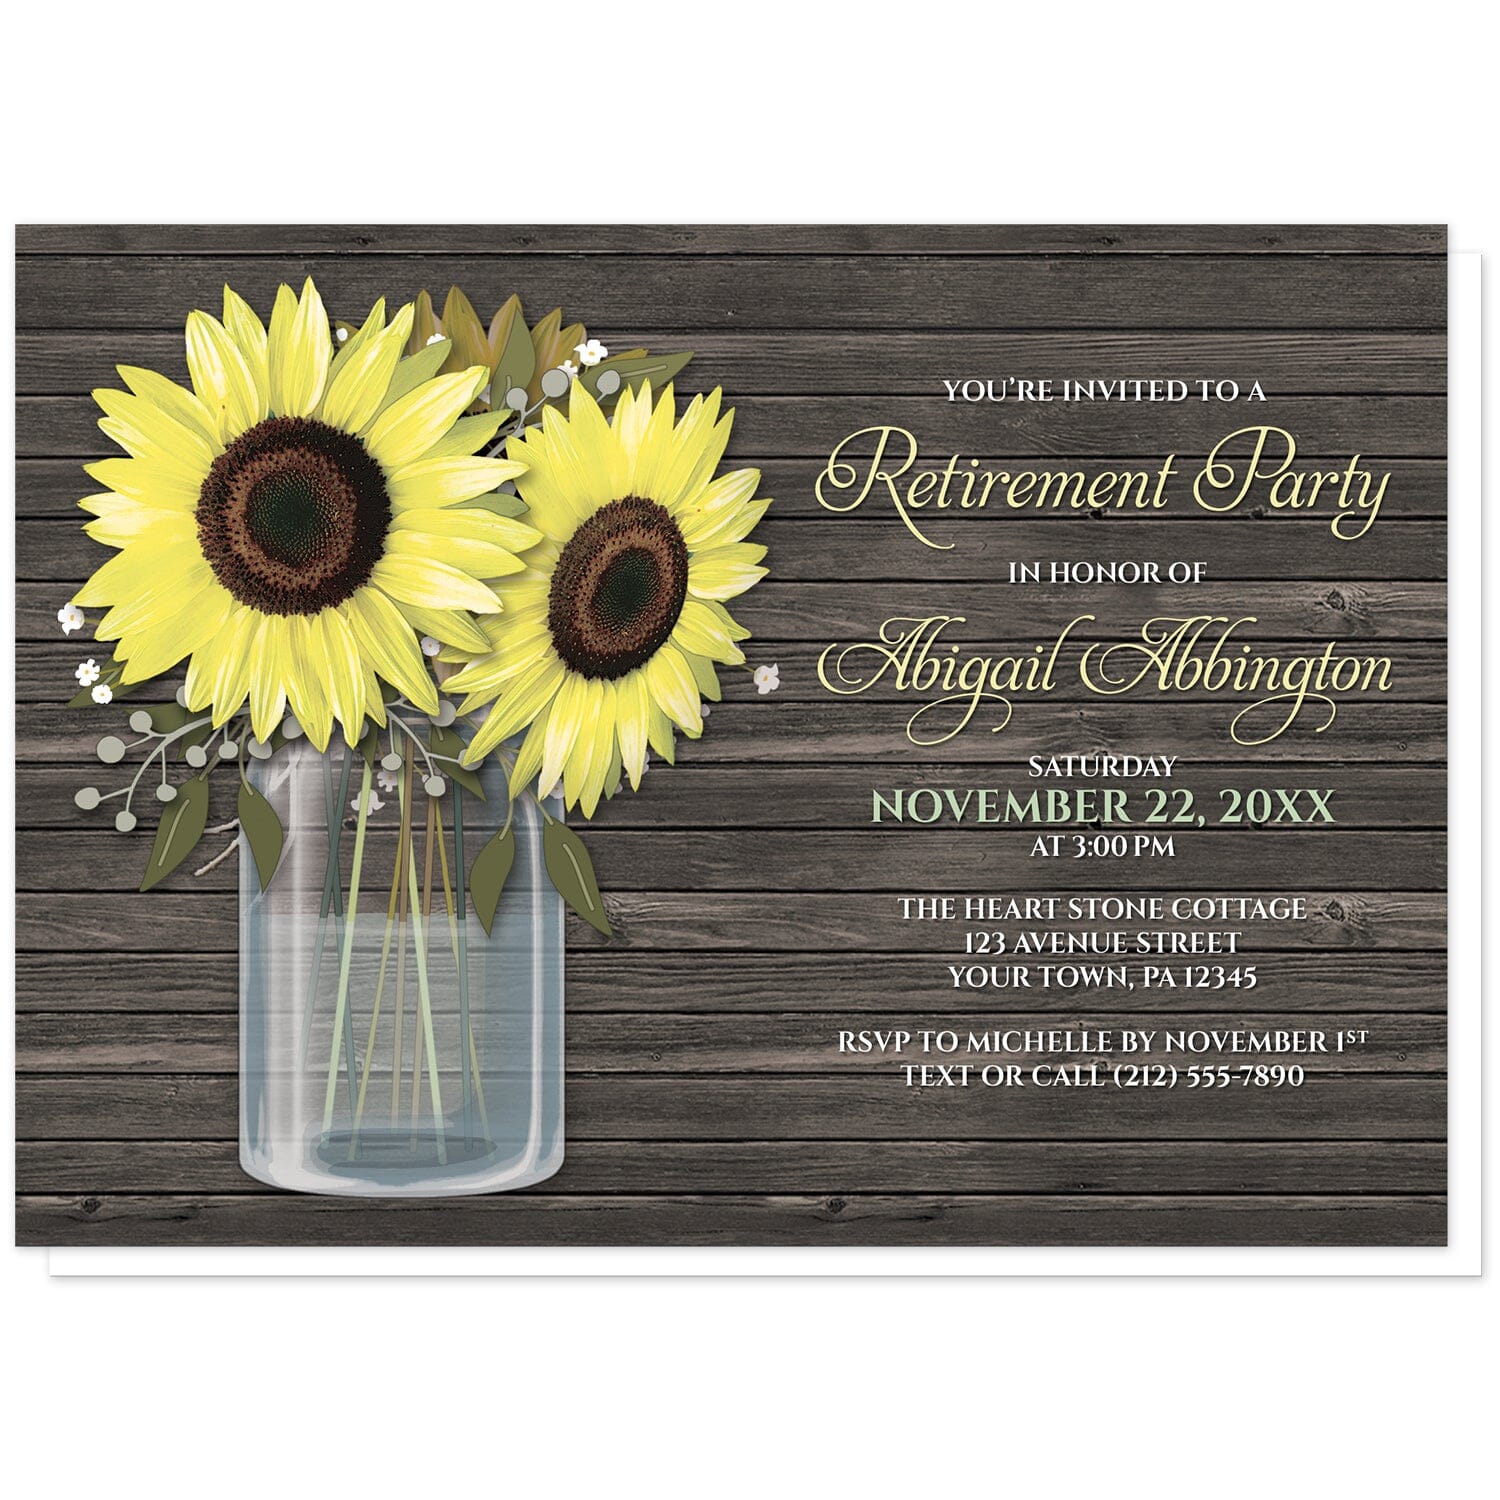 Rustic Sunflower Wood Mason Jar Retirement Invitations at Artistically Invited. Southern country-inspired rustic sunflower wood mason jar retirement invitations with big yellow sunflowers, small accents of baby's breath, and green leaves in a glass mason jar illustration. Your personalized retirement party details are custom printed in yellow and white to the right of the sunflowers and mason jar design over a dark brown wood background.